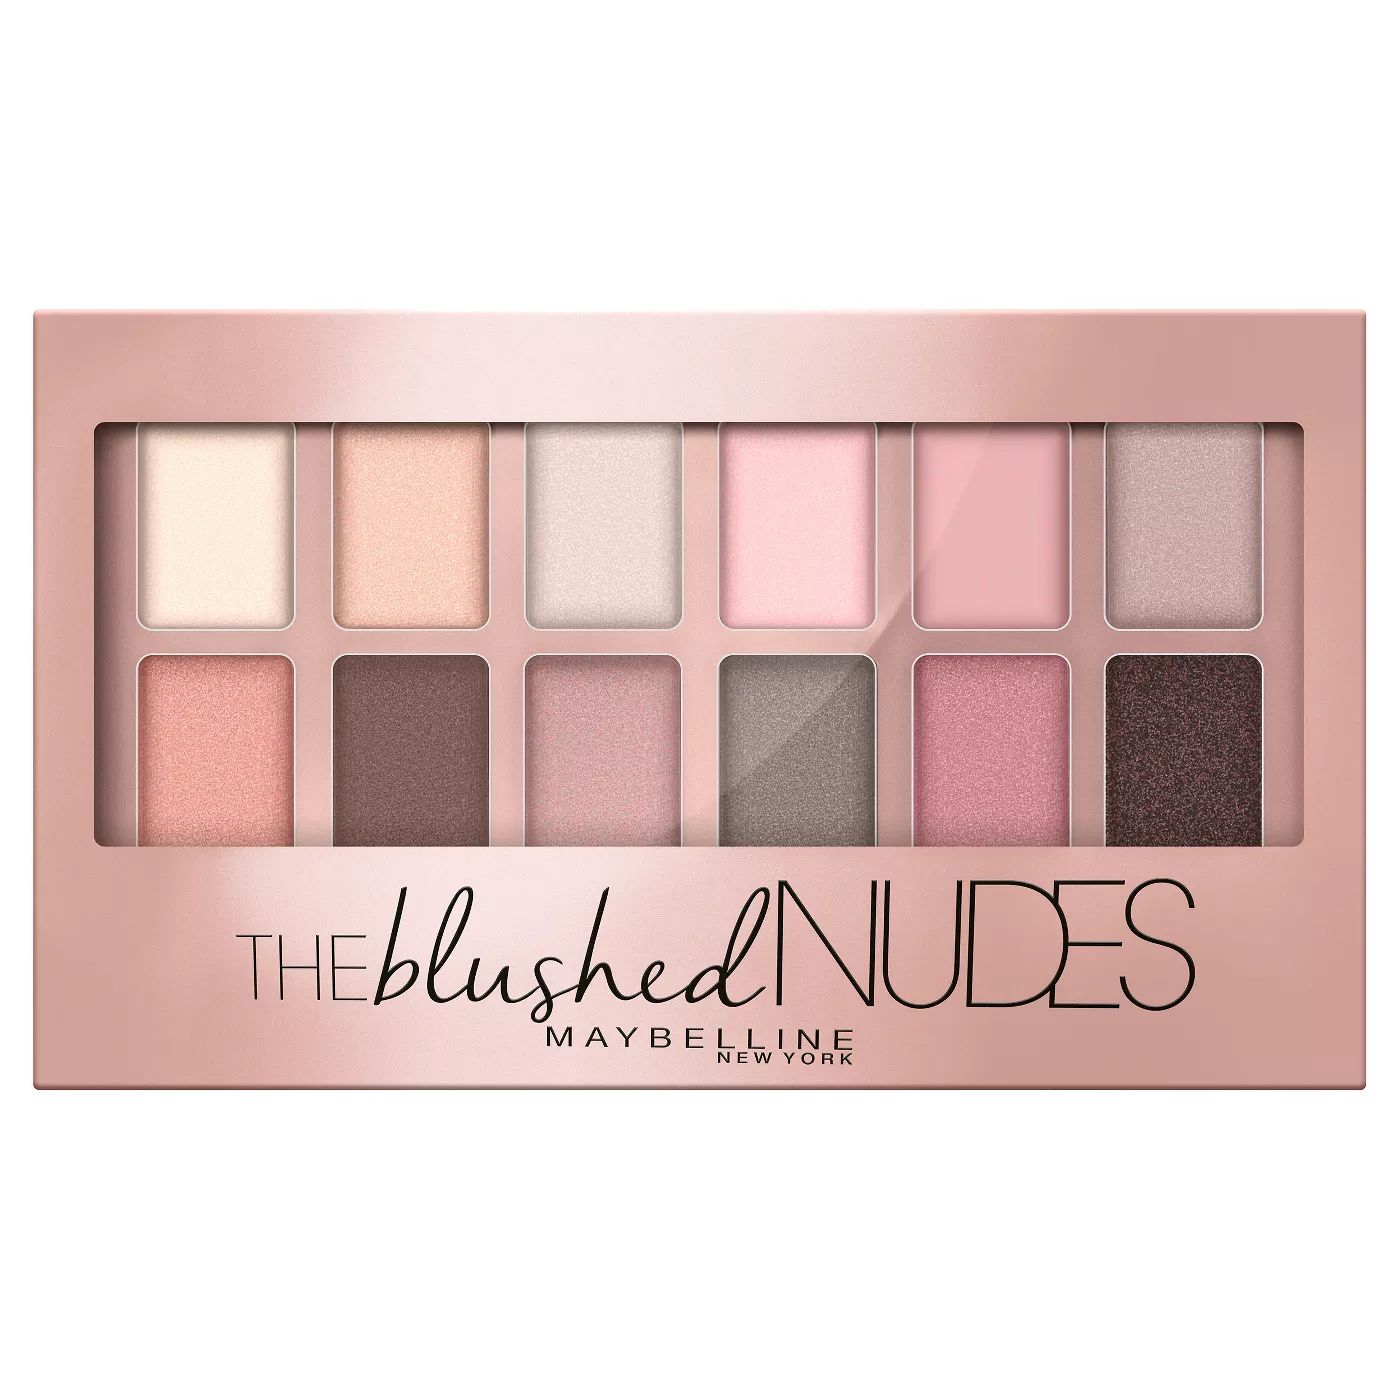 Maybelline The Blushed Nudes Eye Shadow Palette 06 0.34oz | Target